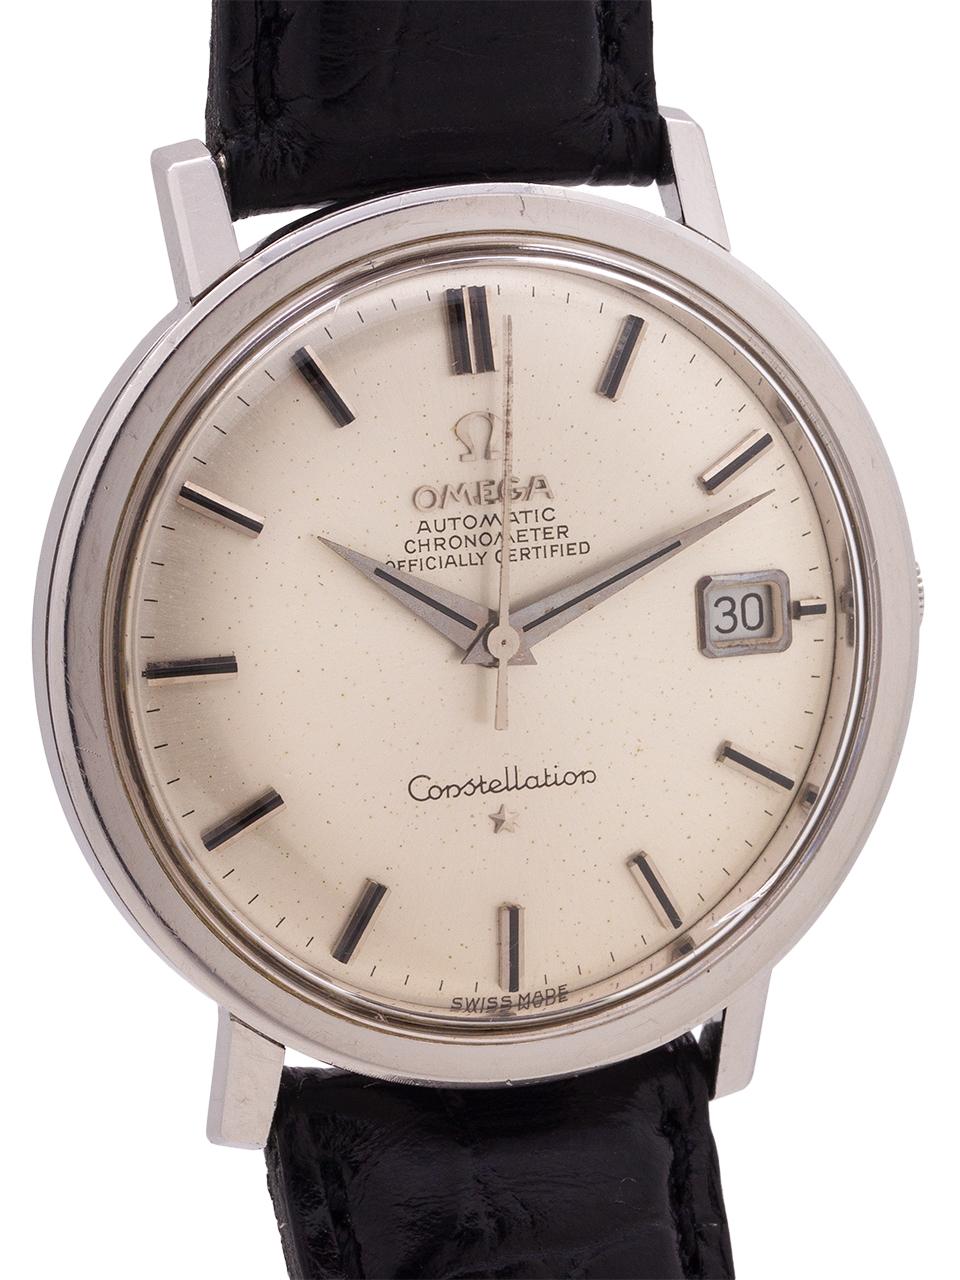 
Omega Constellation stainless steel ref# 168.004 movement serial# 24 million circa 1966. Featuring a 35mm case with screw down case back and deeply engraved Observatory logo, with acrylic crystal, and beautiful condition original silver pie pan